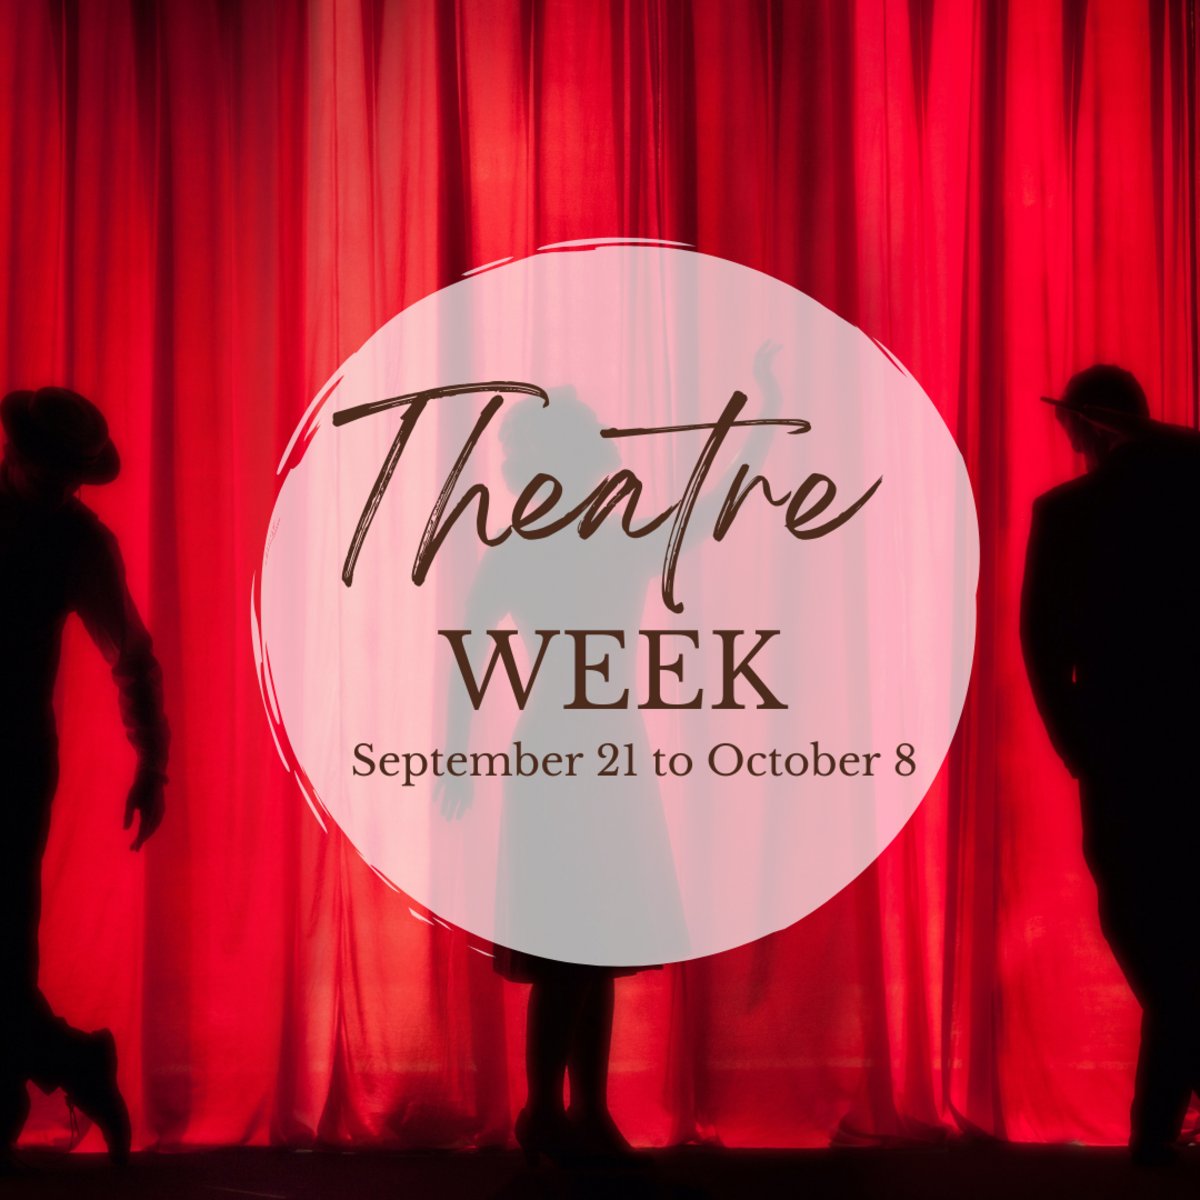 Theatre Washington is launching its theatre season with Theatre Week, starting September 21st and ending October 8th. Join the celebration, attend one of the many shows, or participate in other fun activities. For more information, visit bit.ly/3QXyKmP.